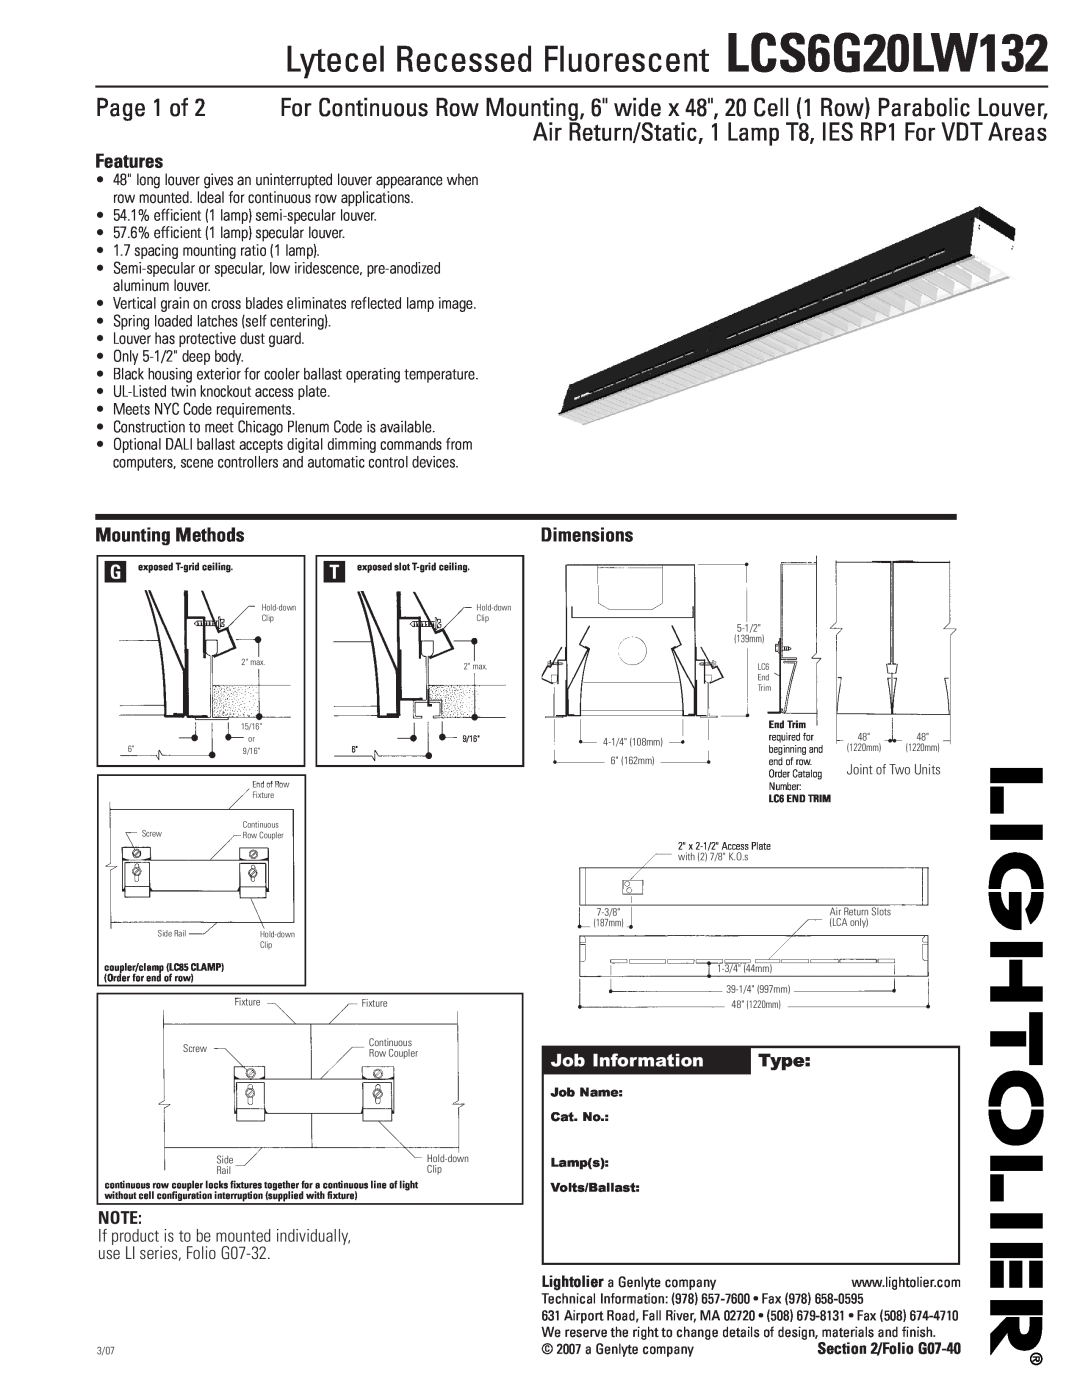 Lightolier dimensions Lytecel Recessed Fluorescent LCS6G20LW132, Features, Mounting Methods, Dimensions, Type 